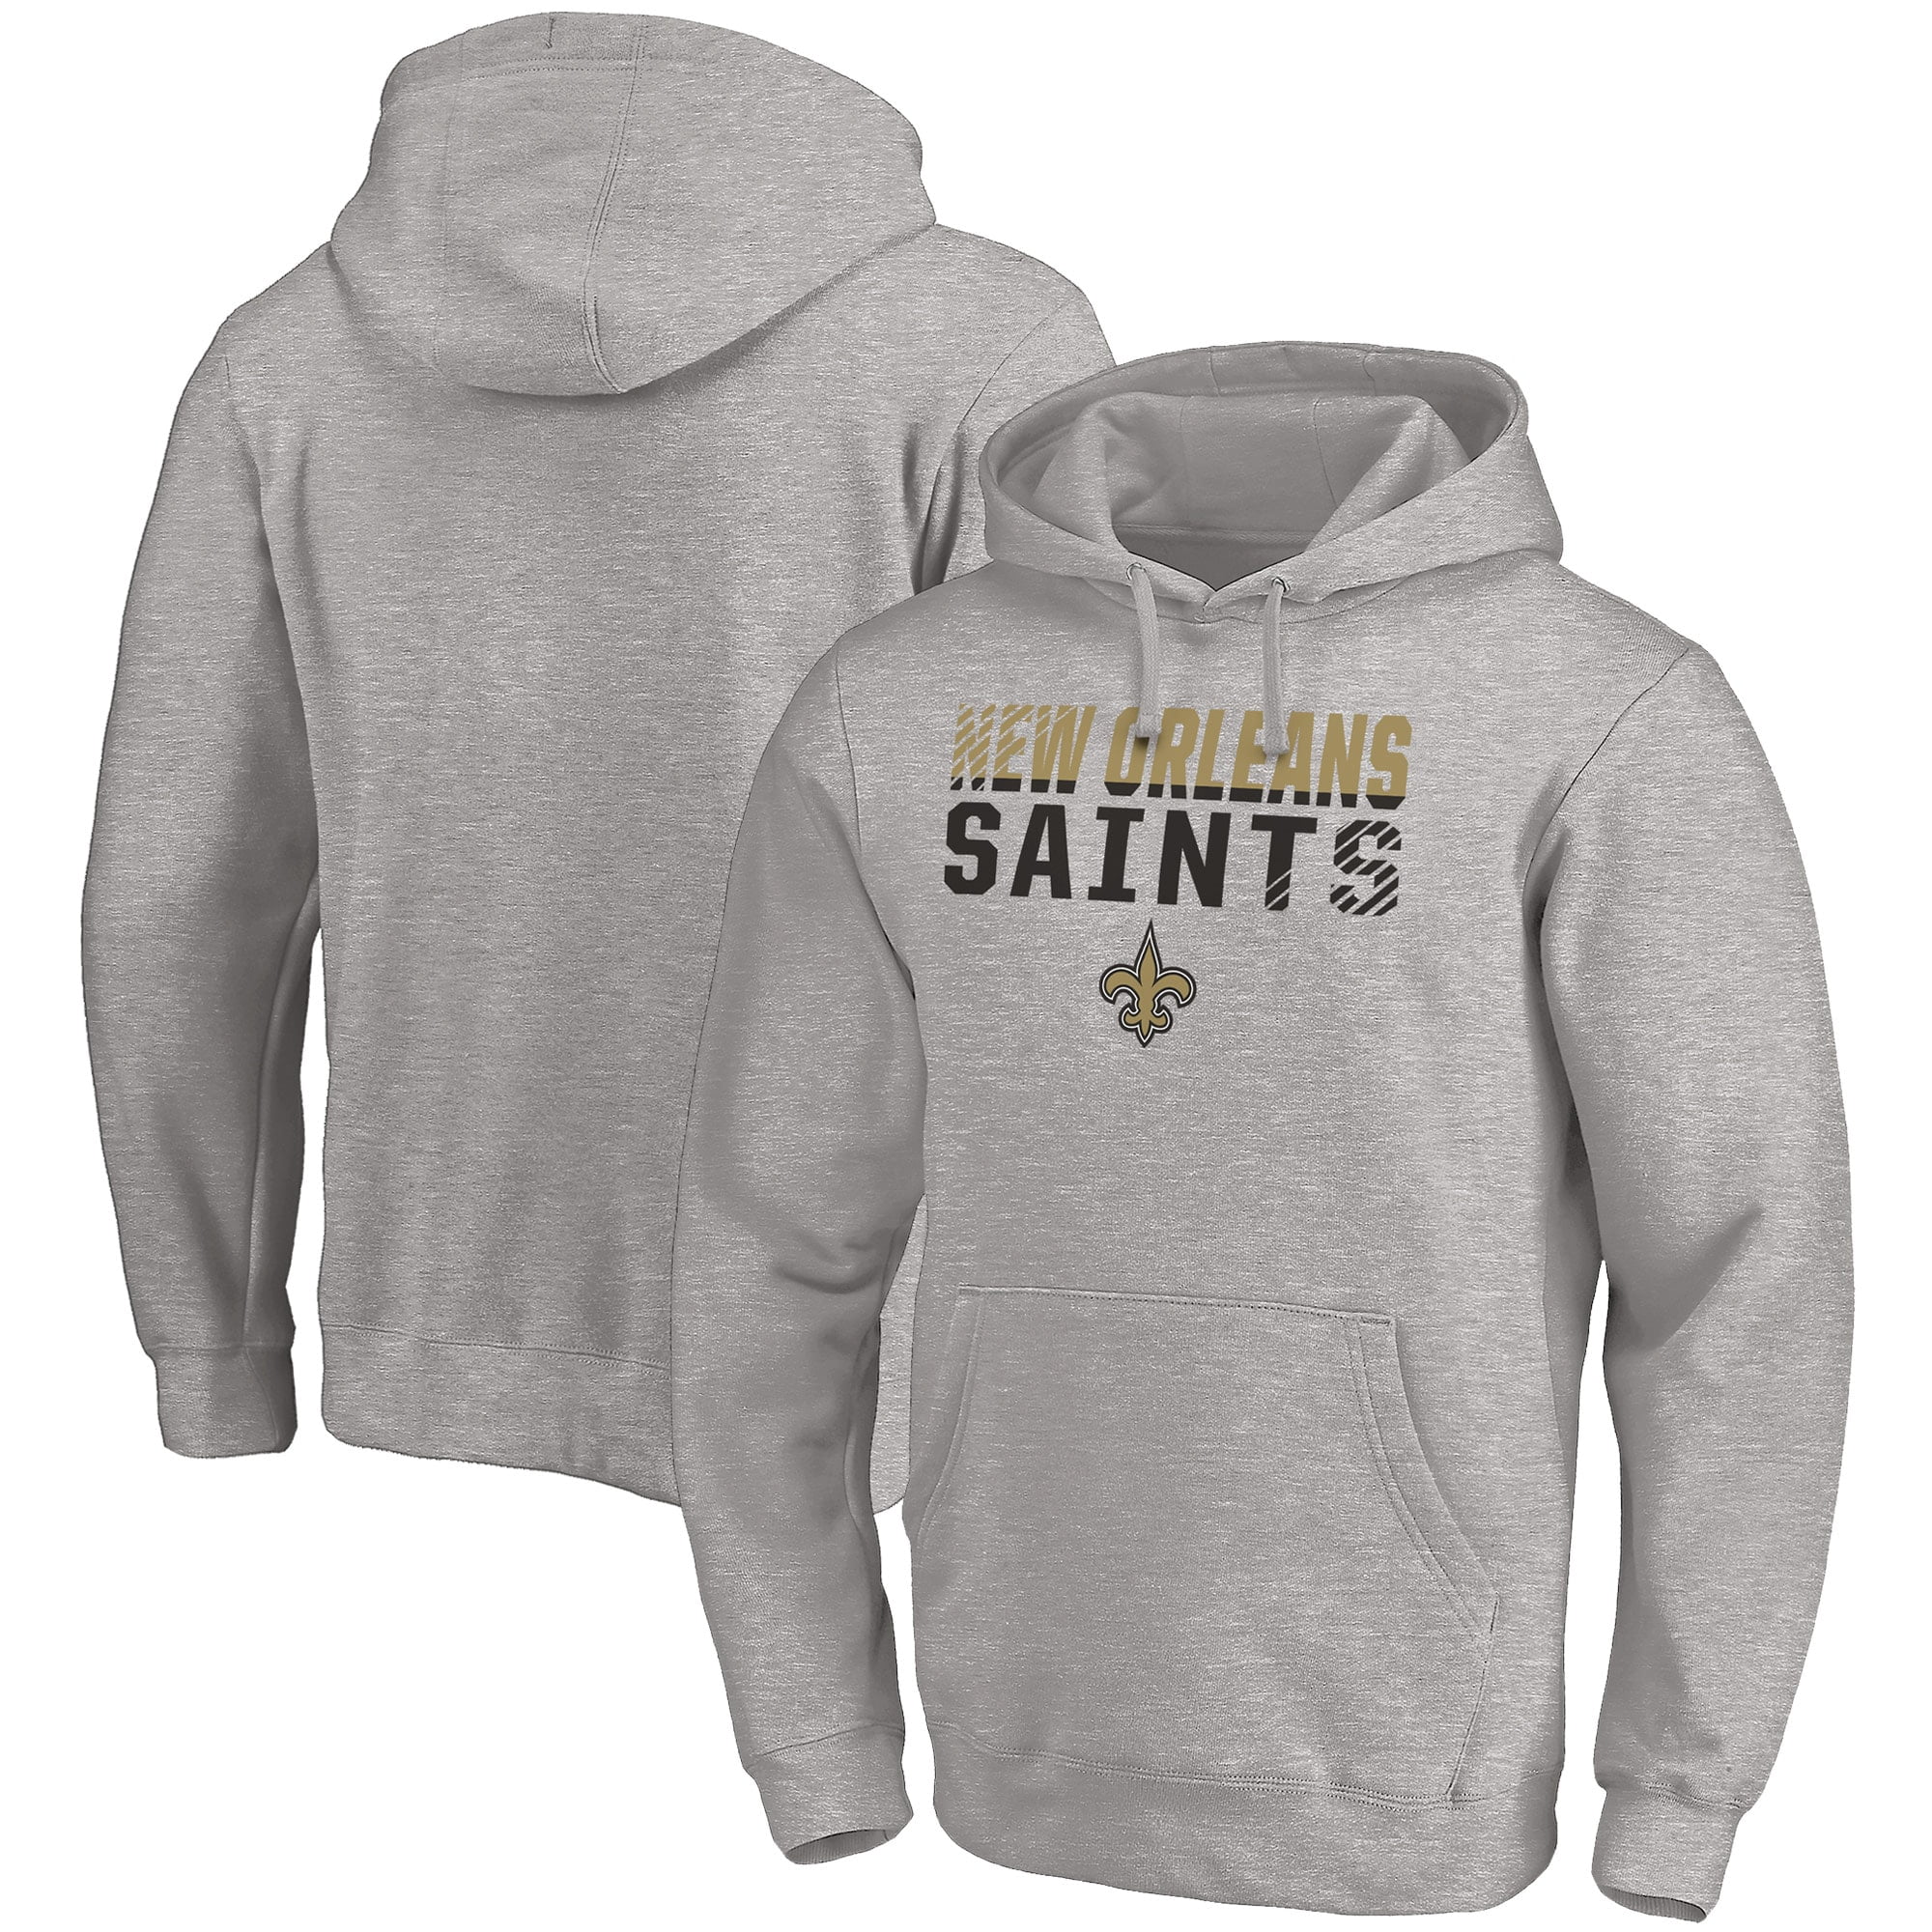 Autumn And Winter Leisure Pullover For New Orleans Saints Mens American Football Hoodie Fleece Sweatshirts Color : Gray, Size : S 